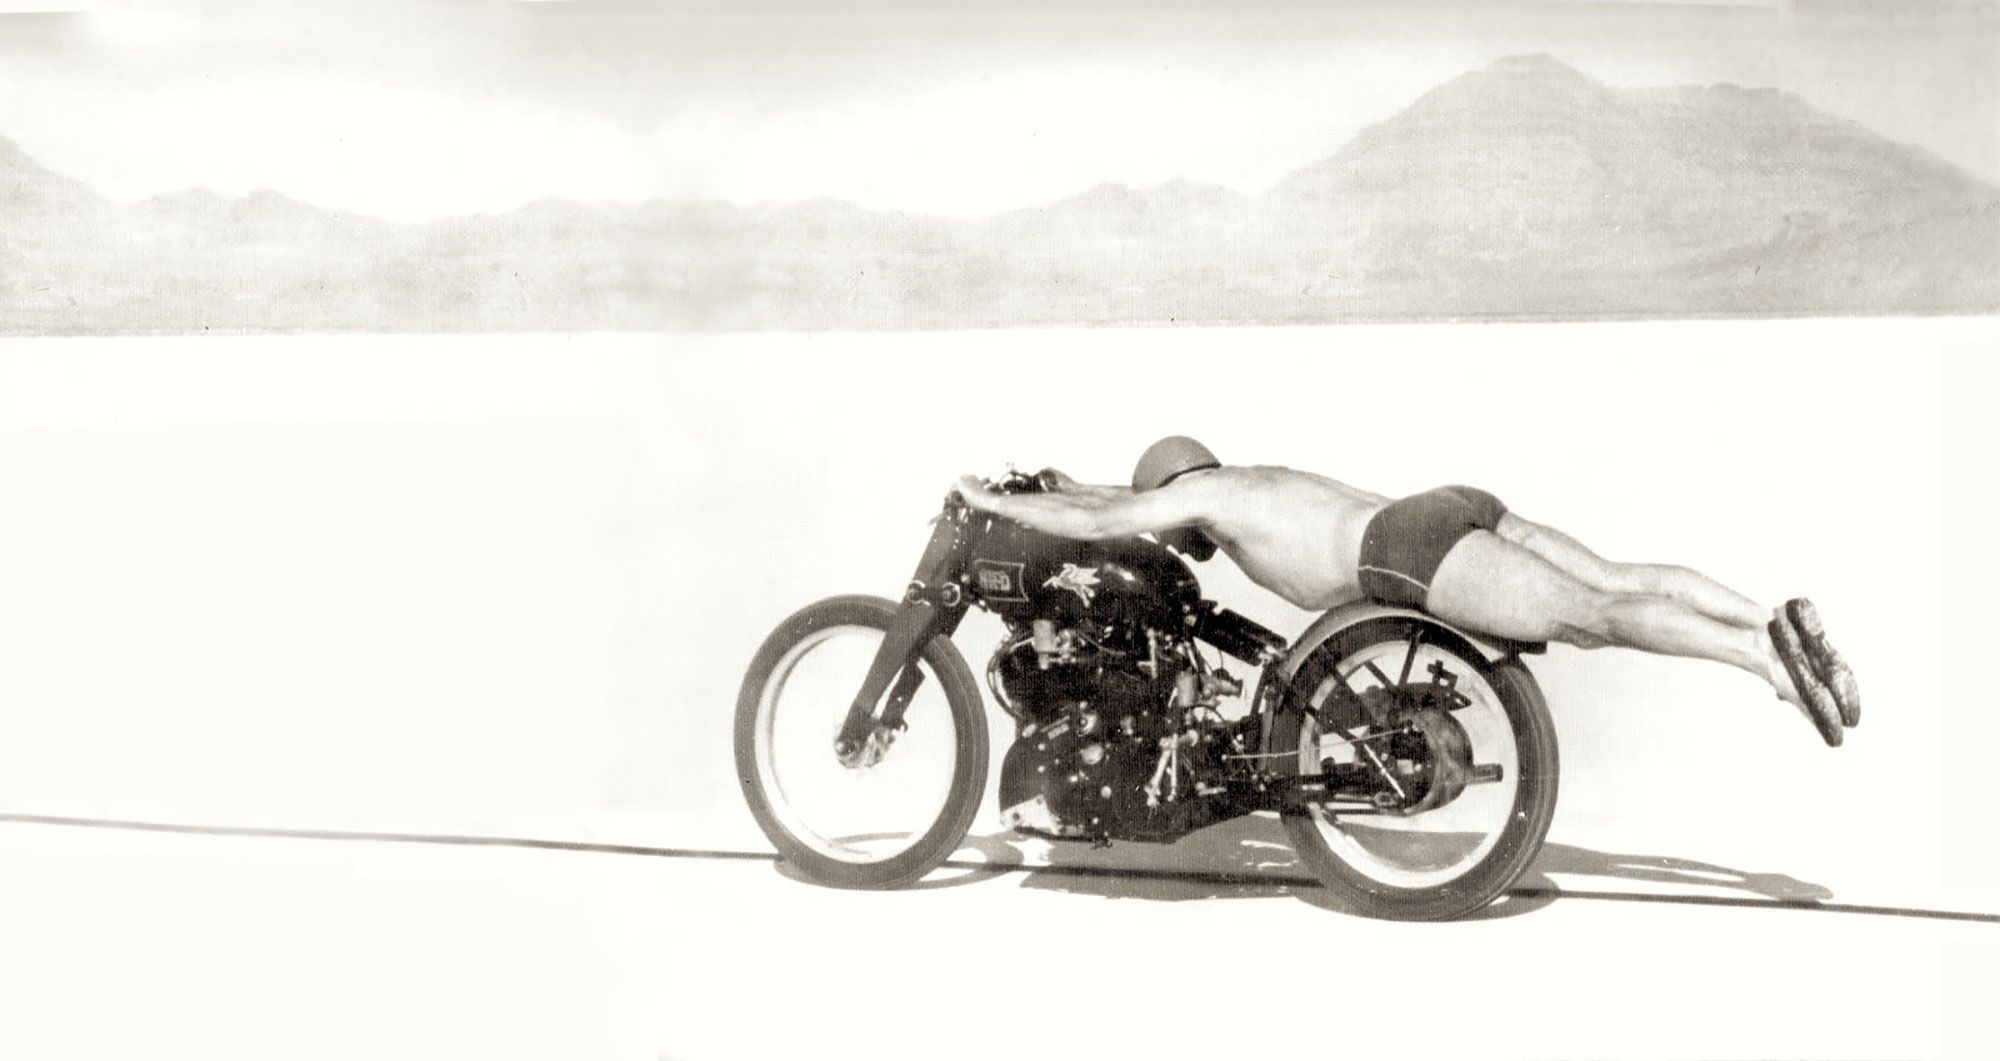 The most famous record set on a VIncent was probably the one seen here achieved by Rollie Free